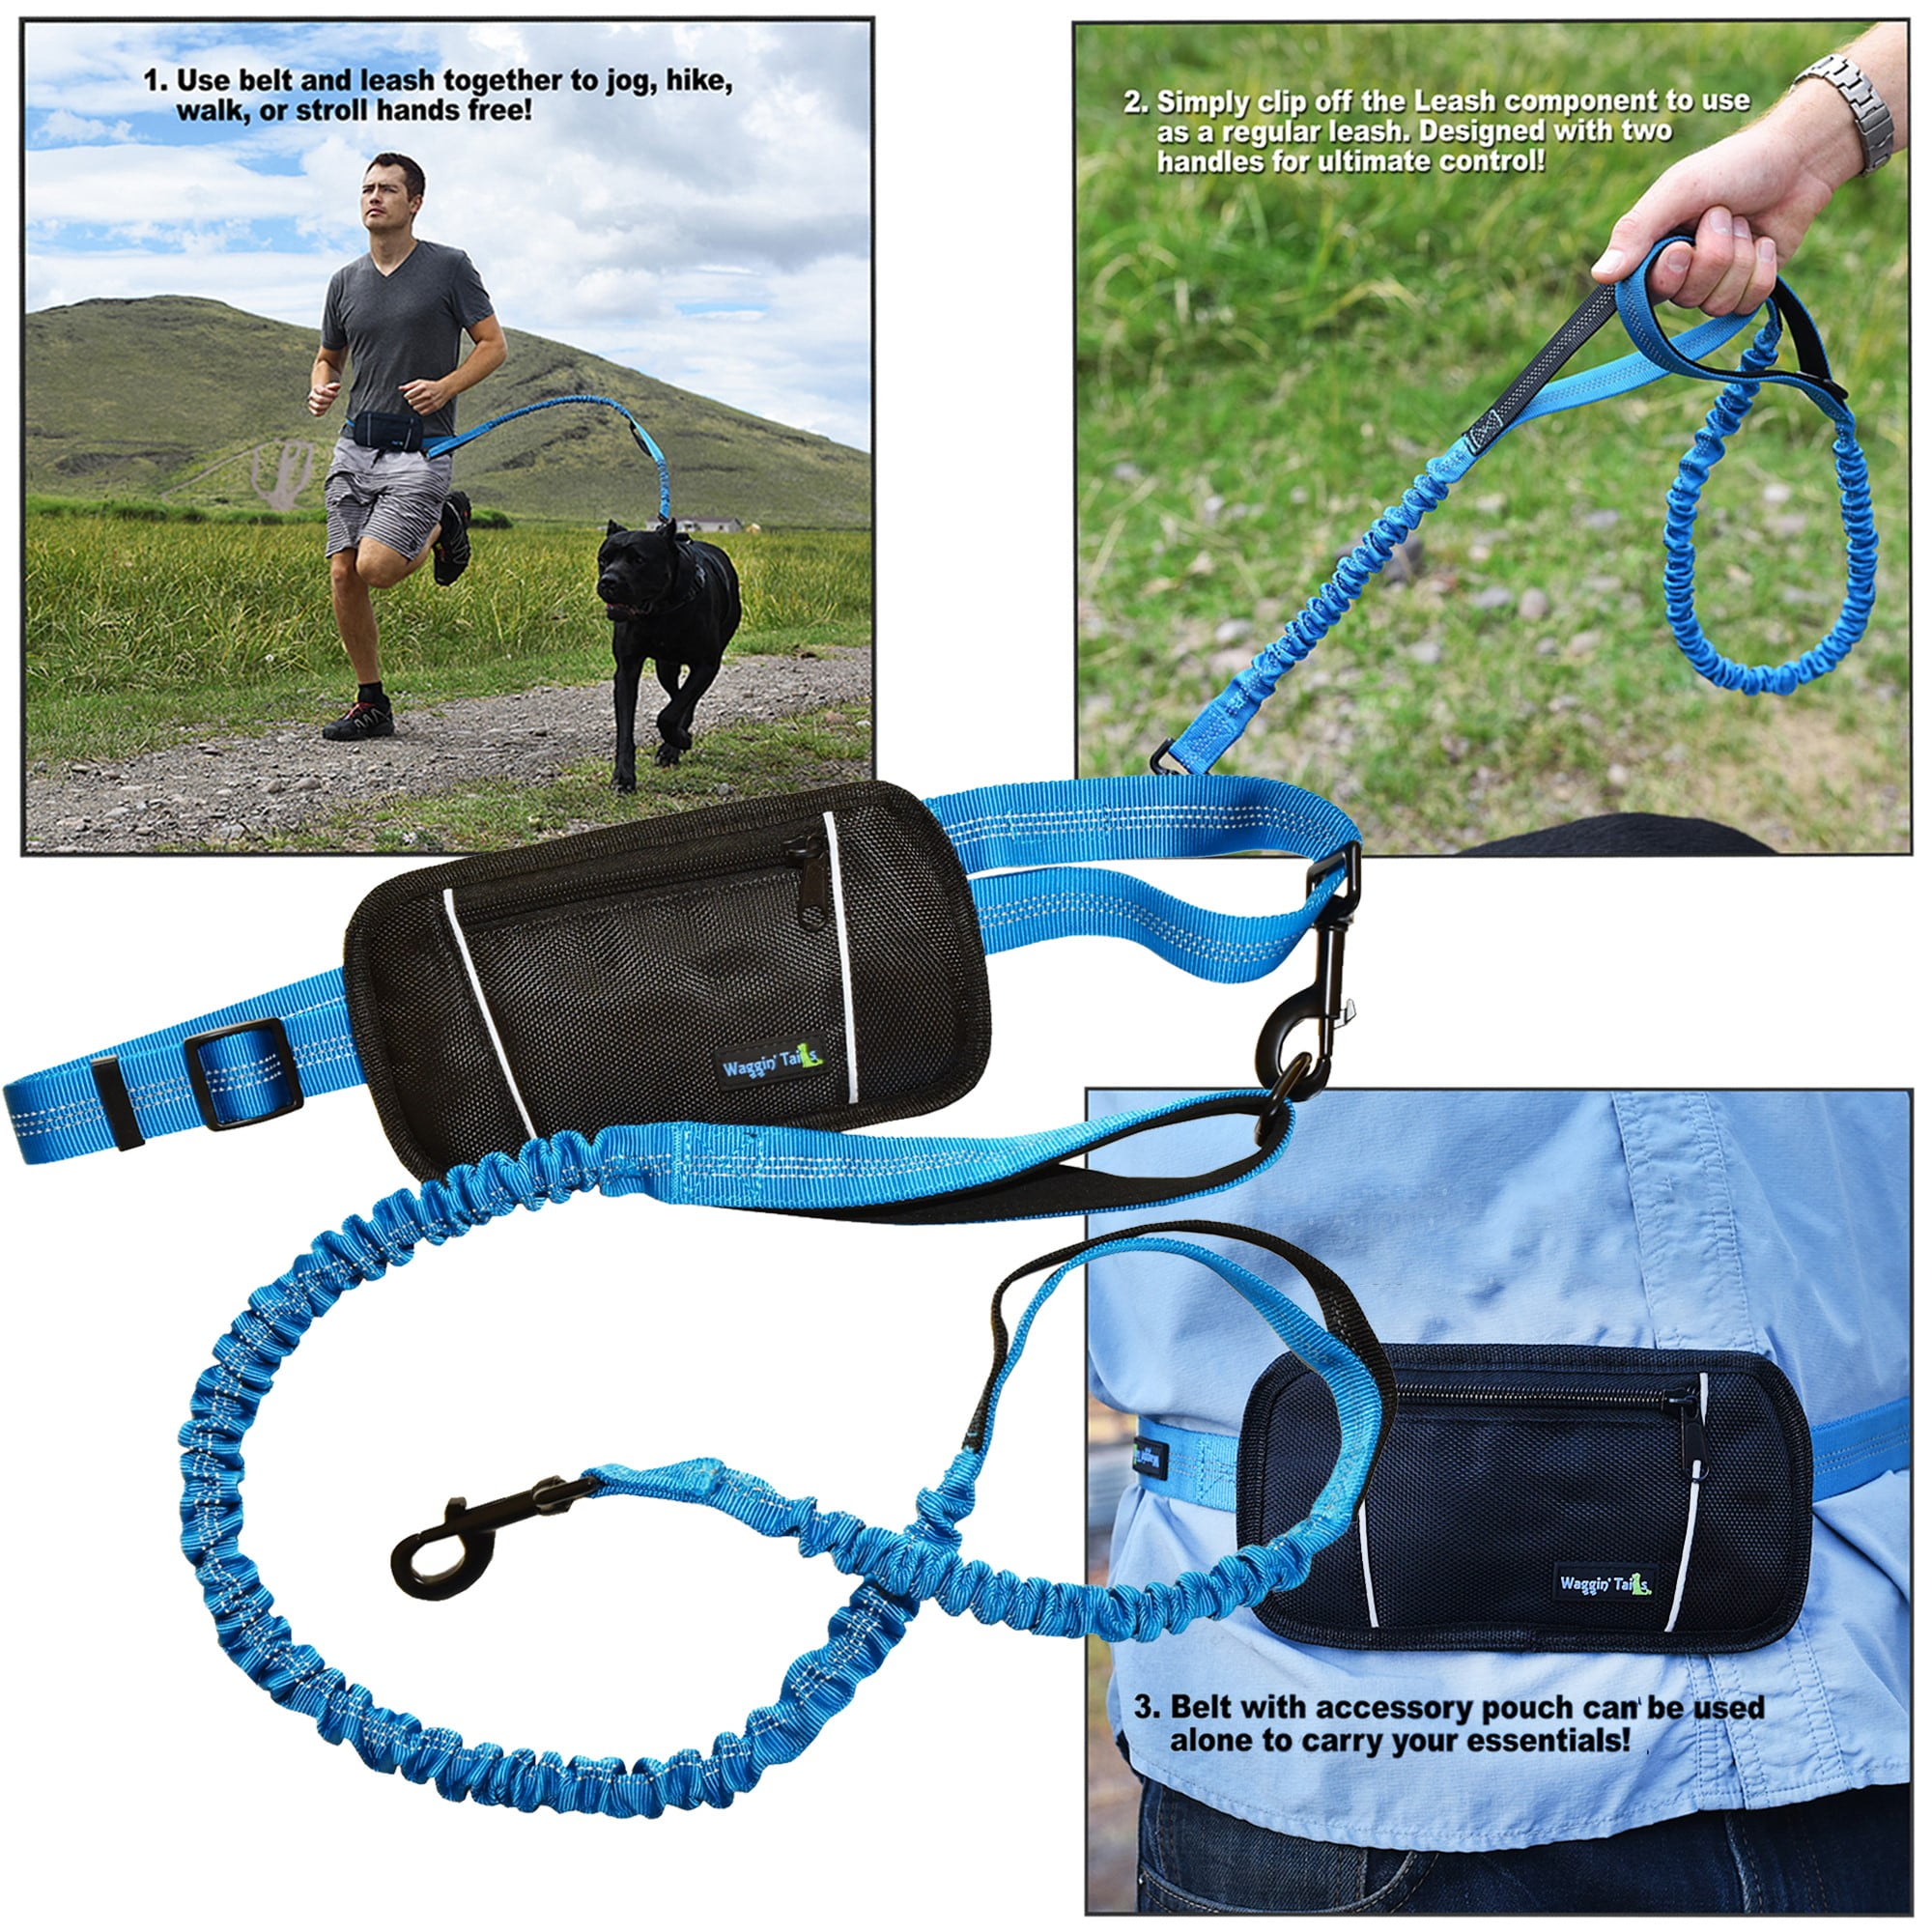 Fits All Waist Sizes from 28” to 48” Dog Walking Training Belt Shock Absorbing Bungee Leash up to 180lbs Large Dogs Phone Pocket Water Bottle Holder FURRY BUDDY Hands Free Dog Leash 